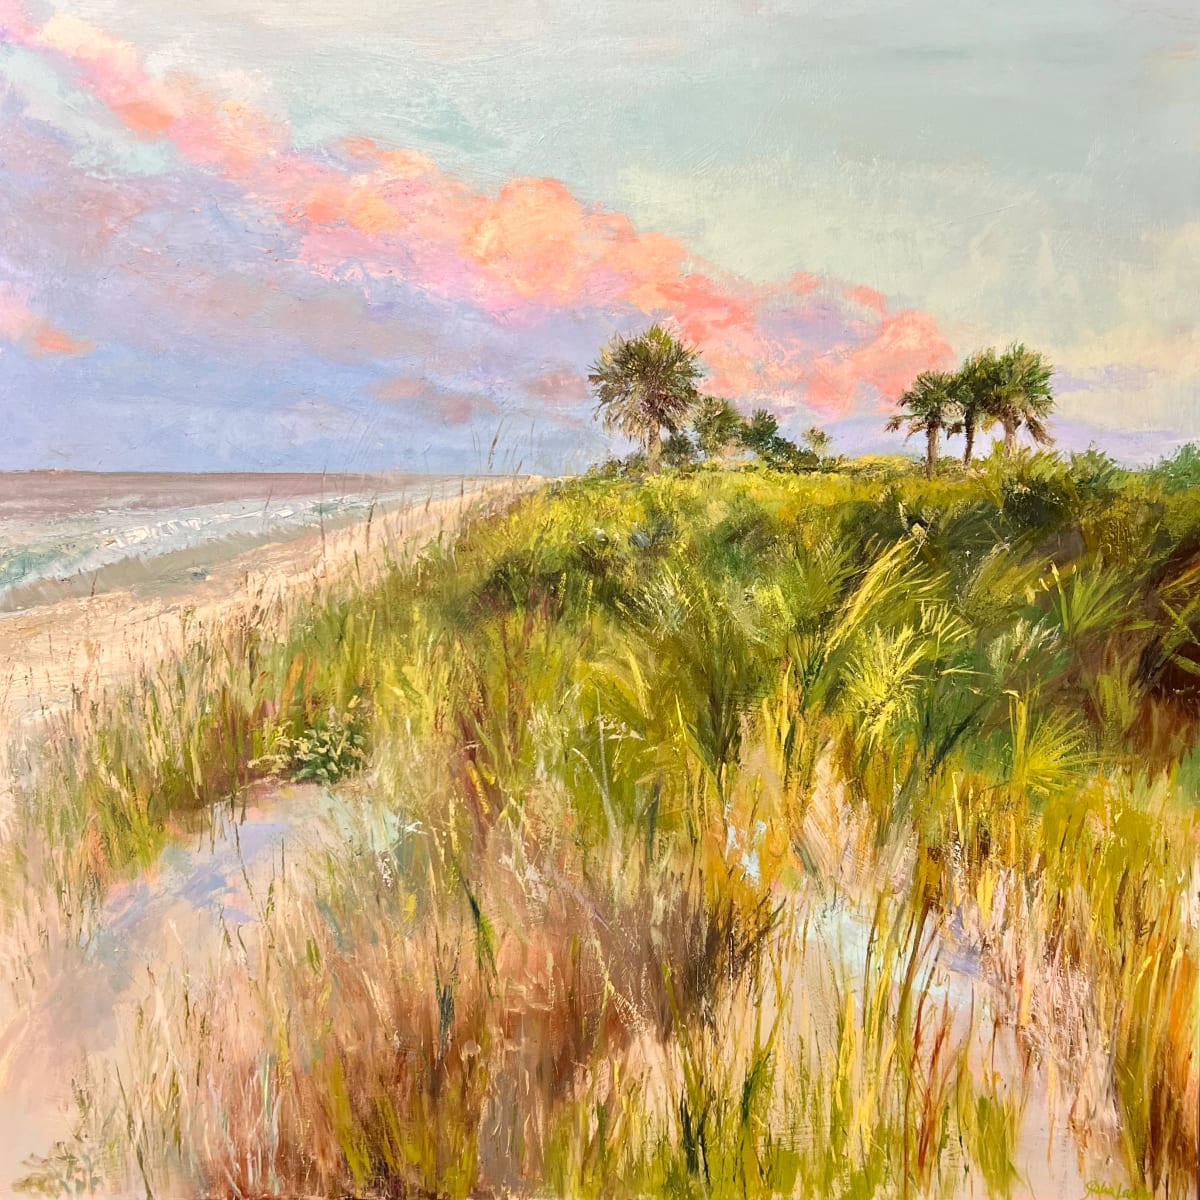 Dunes, Sky & Sea by Julia Chandler Lawing  Image: Palmettos, dunes, sea and sky as sundown approaches. All the grandeur of the southern coast at golden hour. Please inquire for purchase.